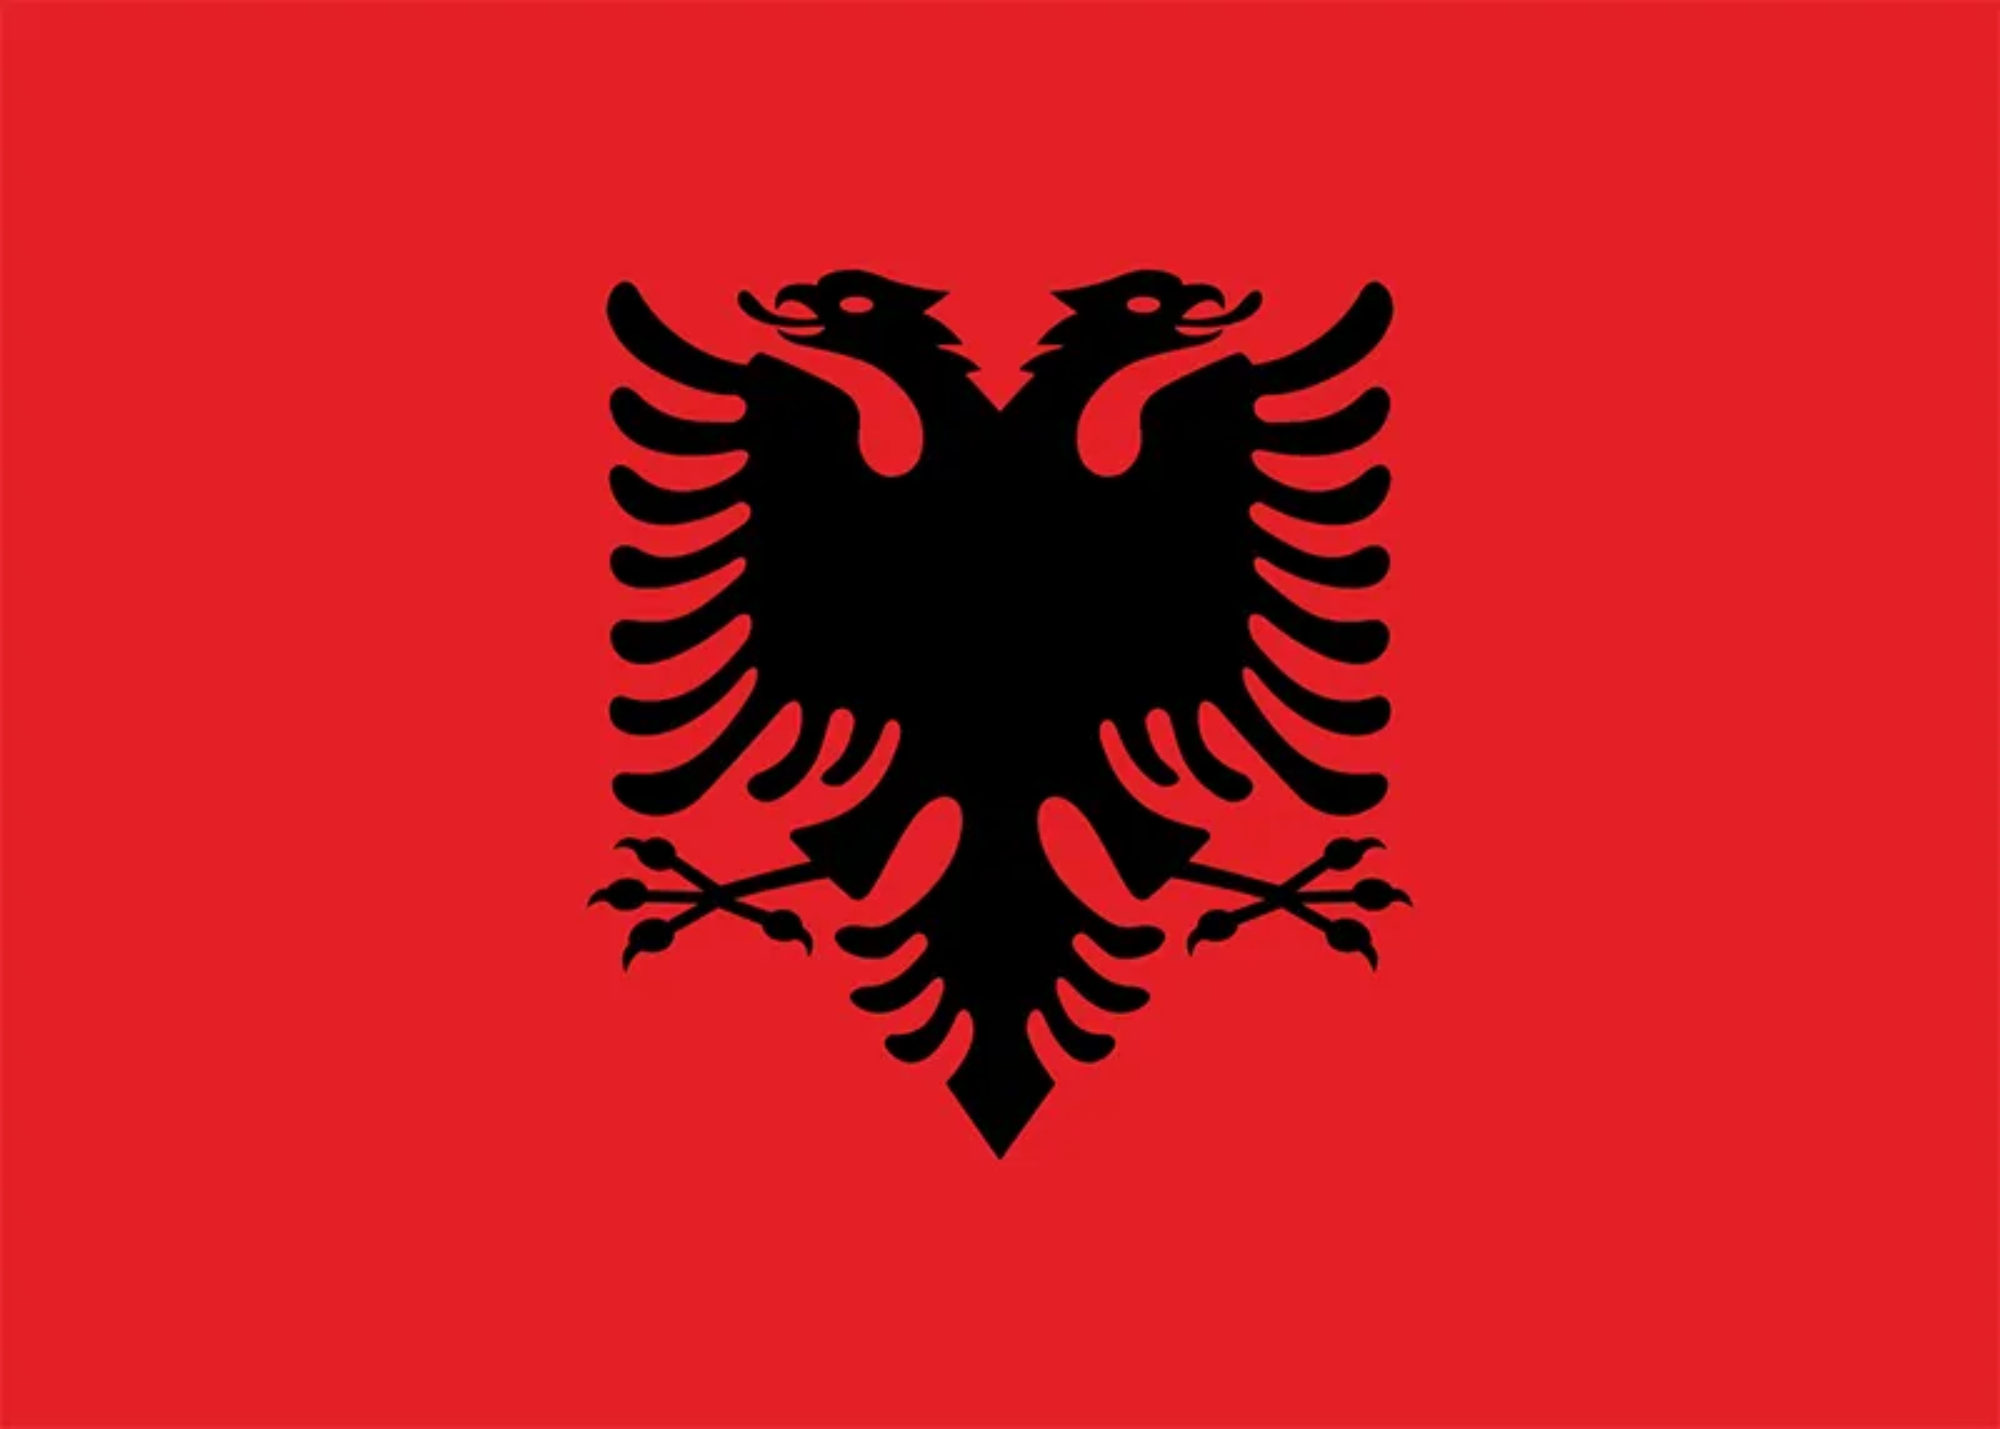 Albania's national flag consists of a red background with a black two-headed eagle in the center